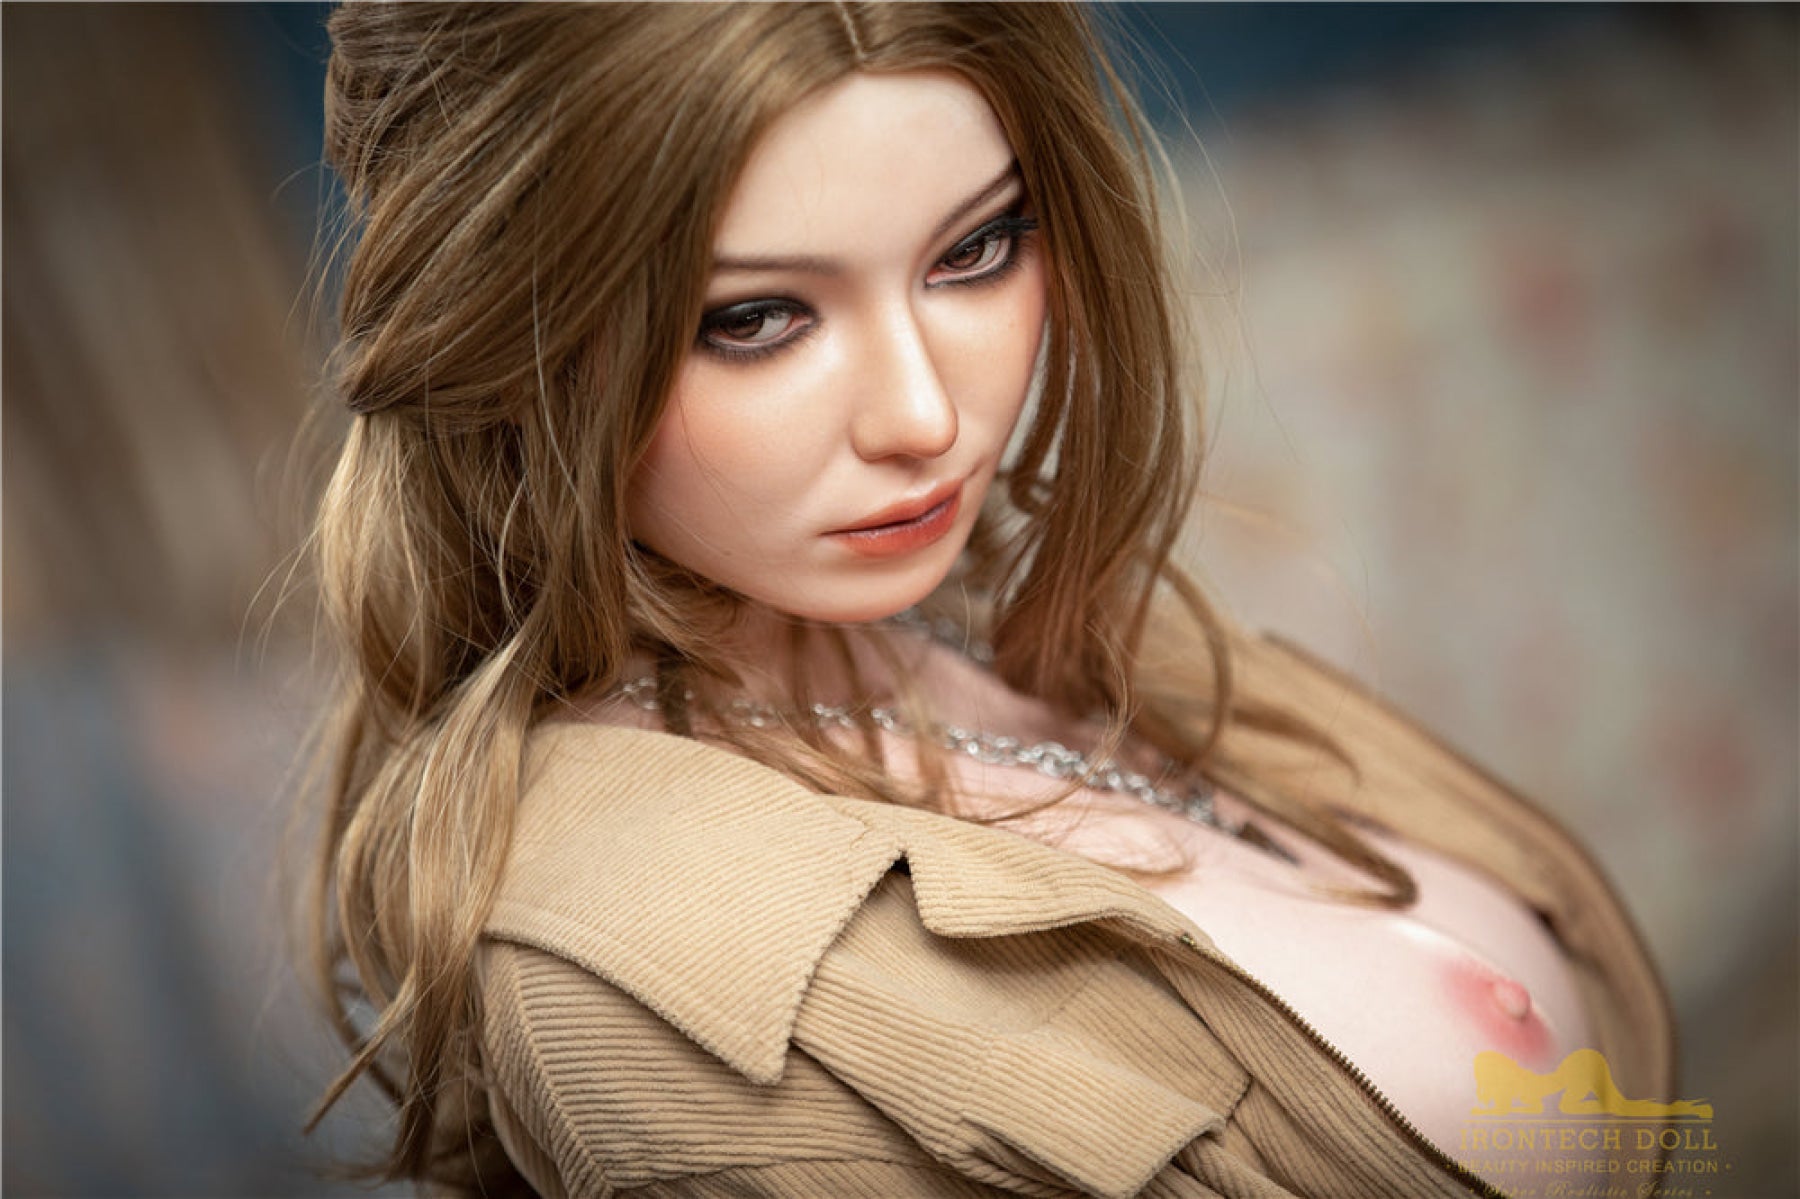 Maria Silicone Real Doll - IronTech Doll® Irontech Doll®